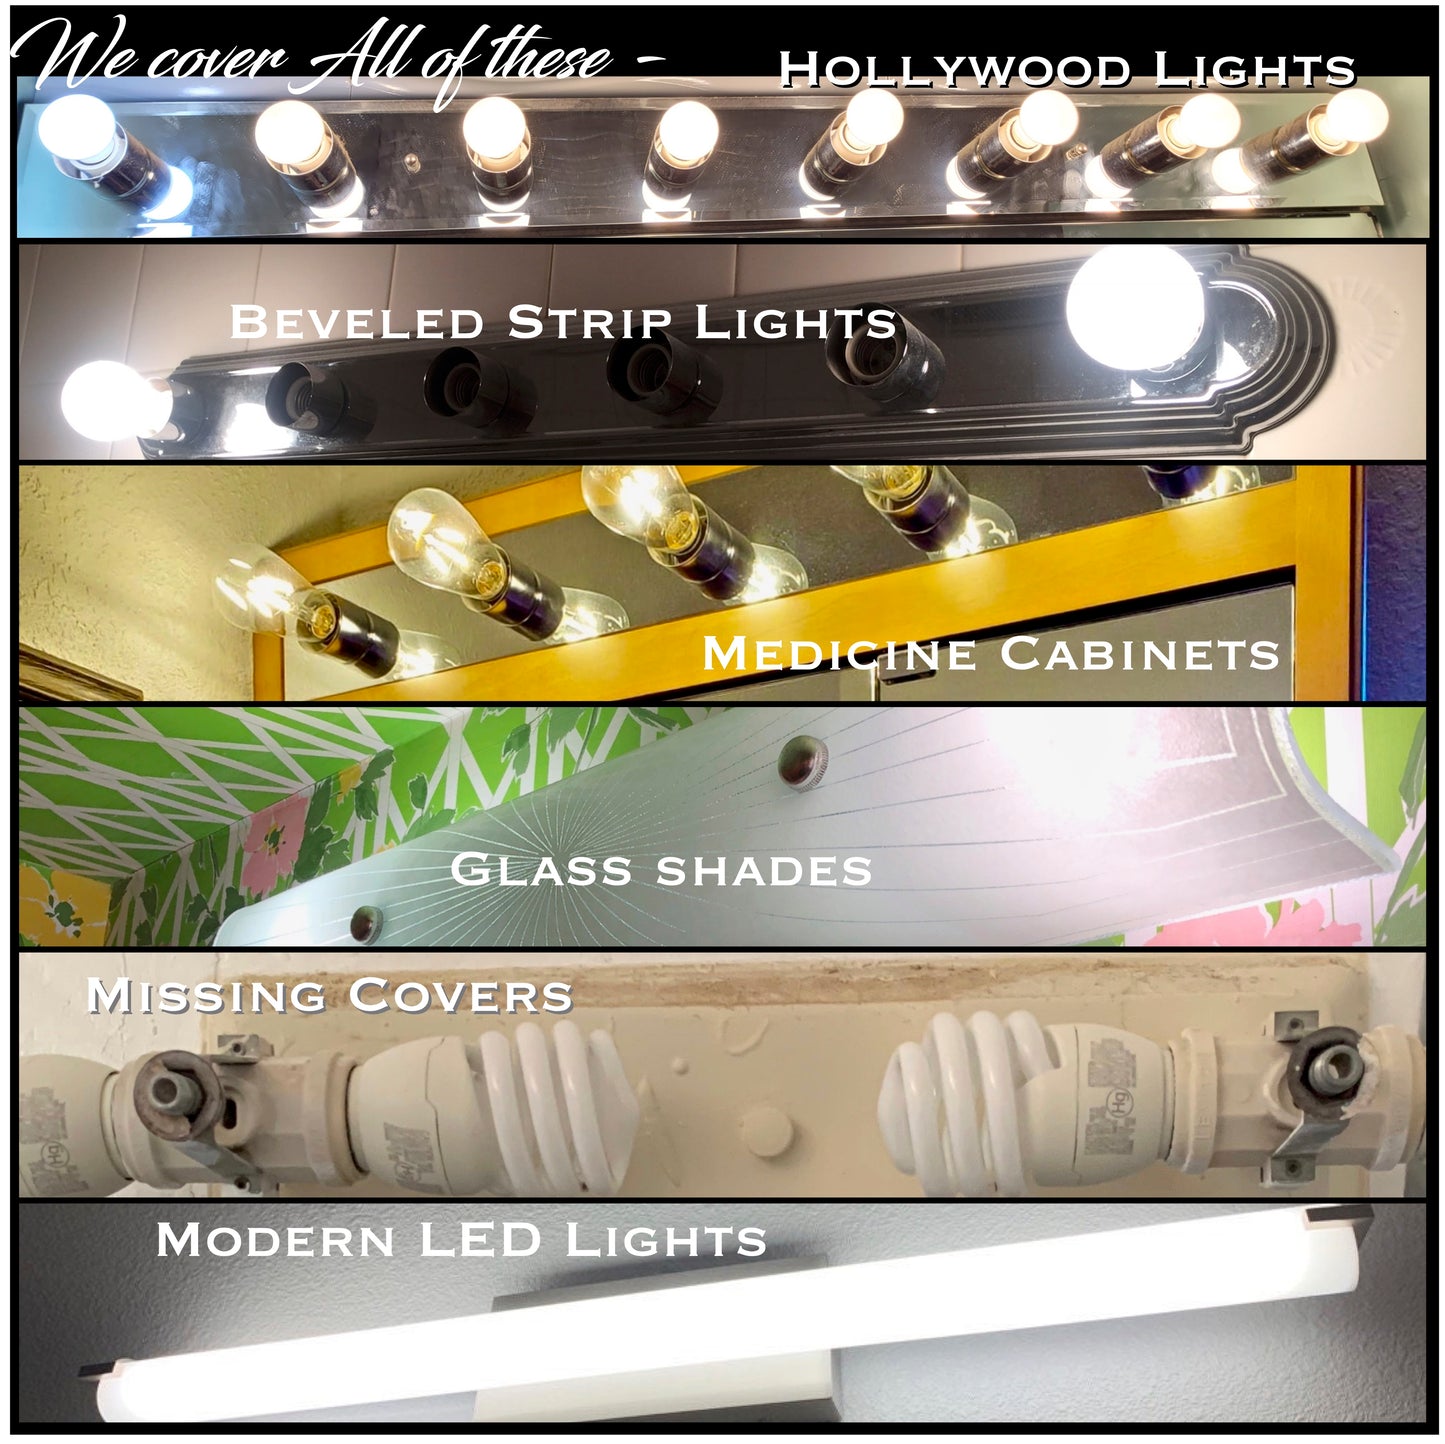  This pic shows 3 types of strip lights that our EzLightWraps cover - a beveled edge fixture with a few bulbs missing, a standard 8 bulb Hollywood Light in gold, and a medicine cabinet with built in lights. This one has Edison bulbs but we can hide those too. Usually you want smaller light bulbs in medicine cabinets.